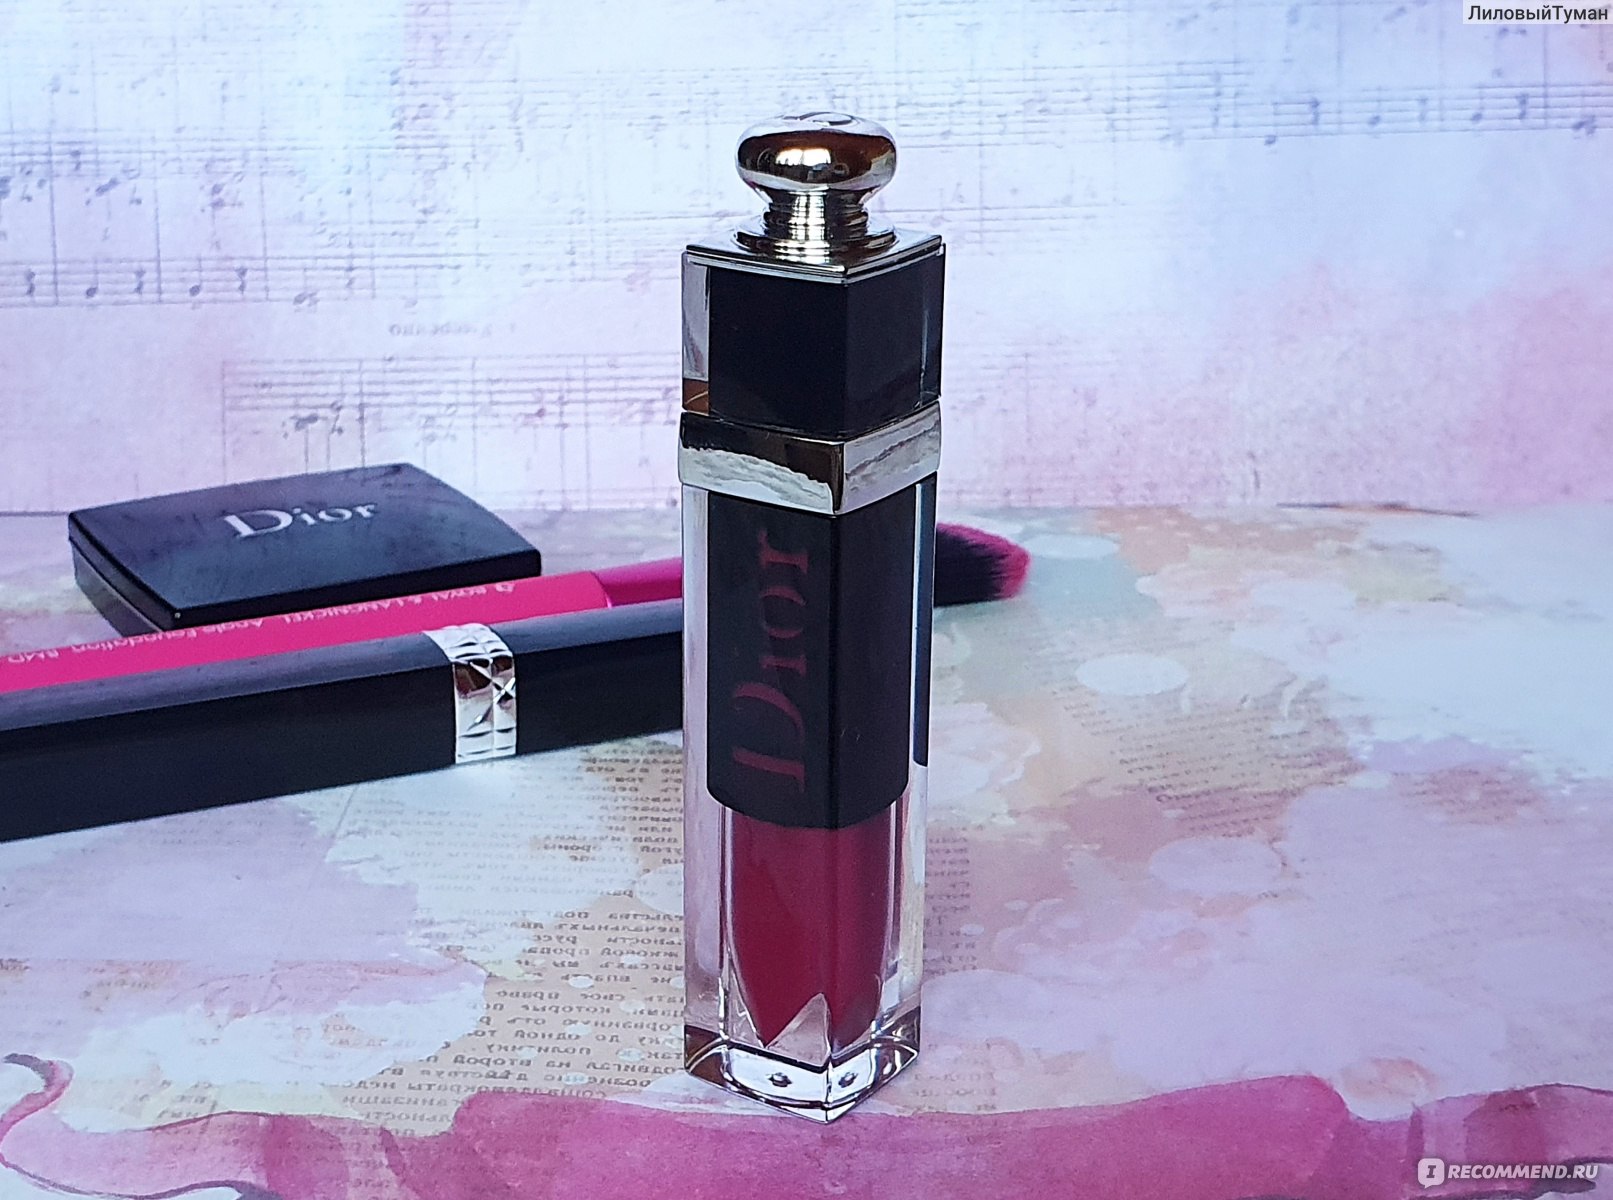 Christian Dior Dior Addict Lacquer Plump  926 DFancy 55ml018oz Make  Up for sale online  eBay